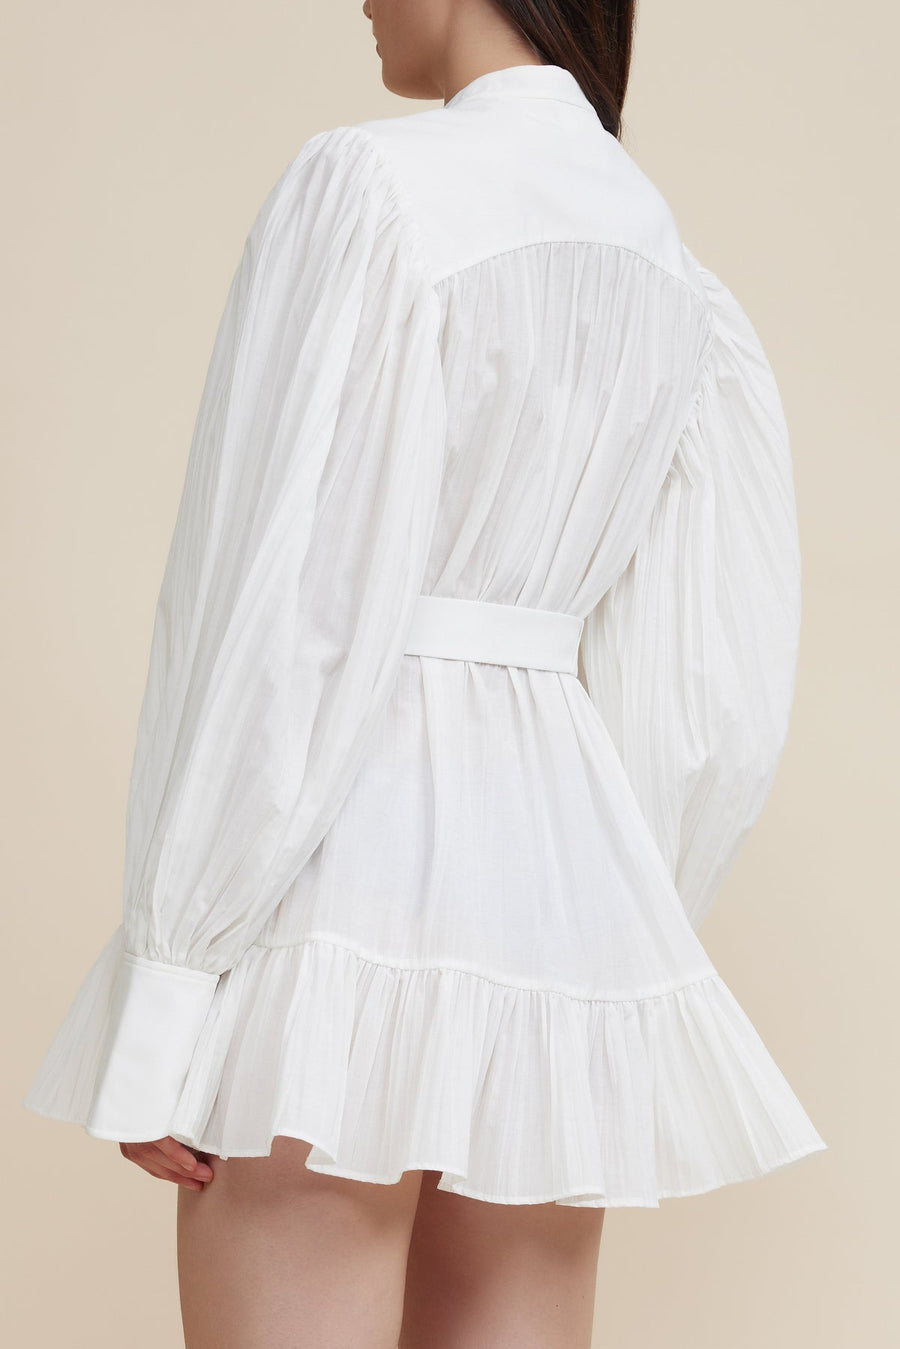 Acler - Harold Dress in Ivory